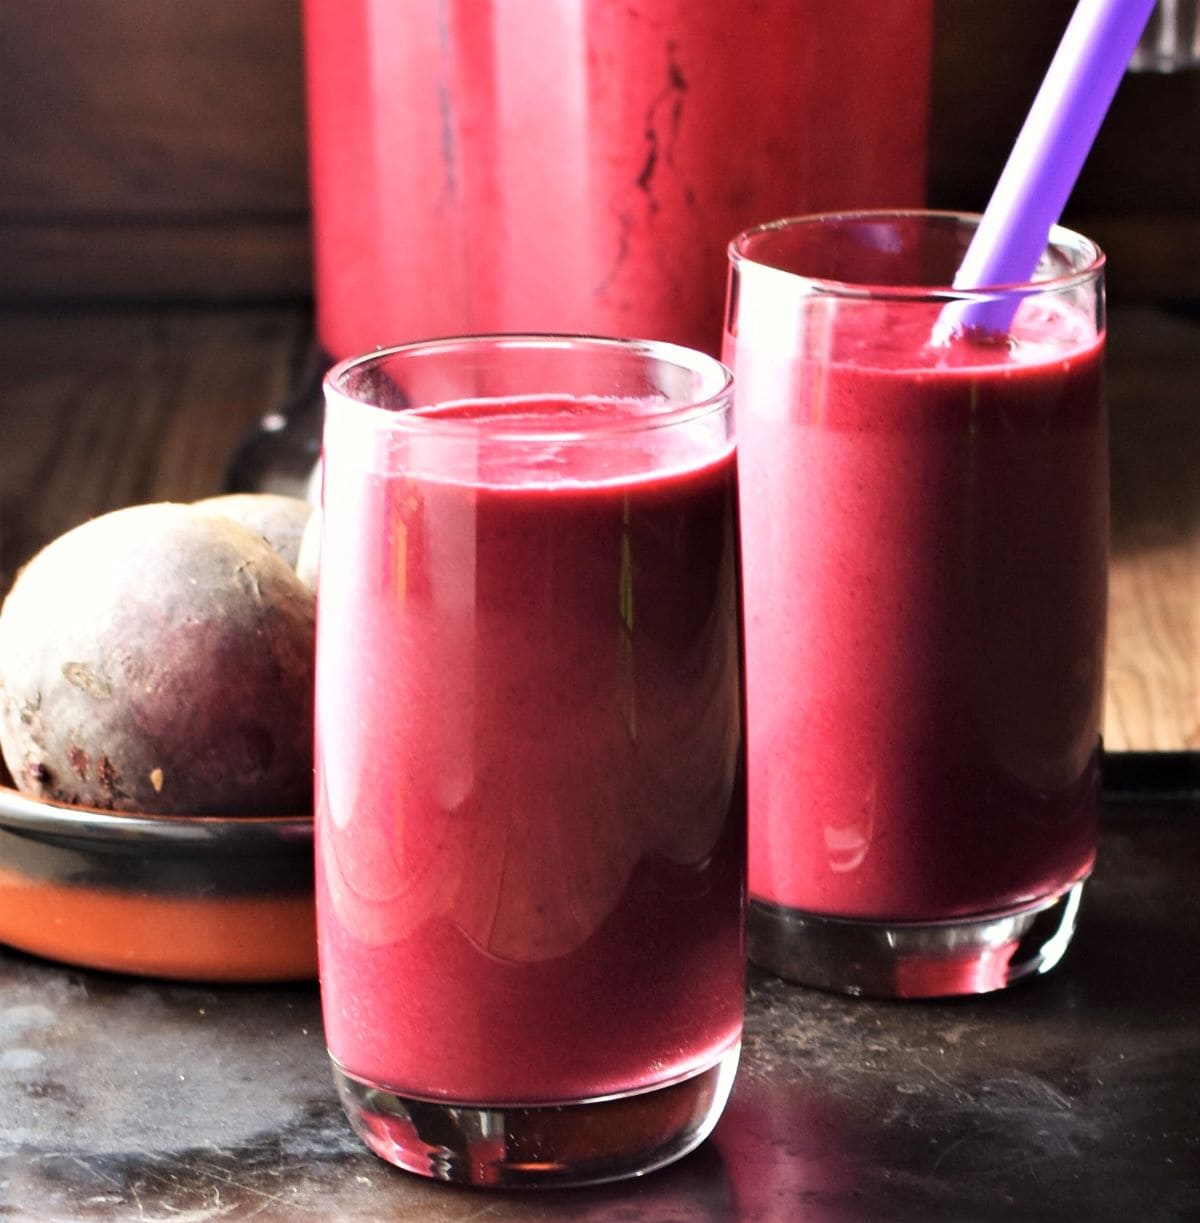 Smoothie in 2 tall glasses and raw beet in background.